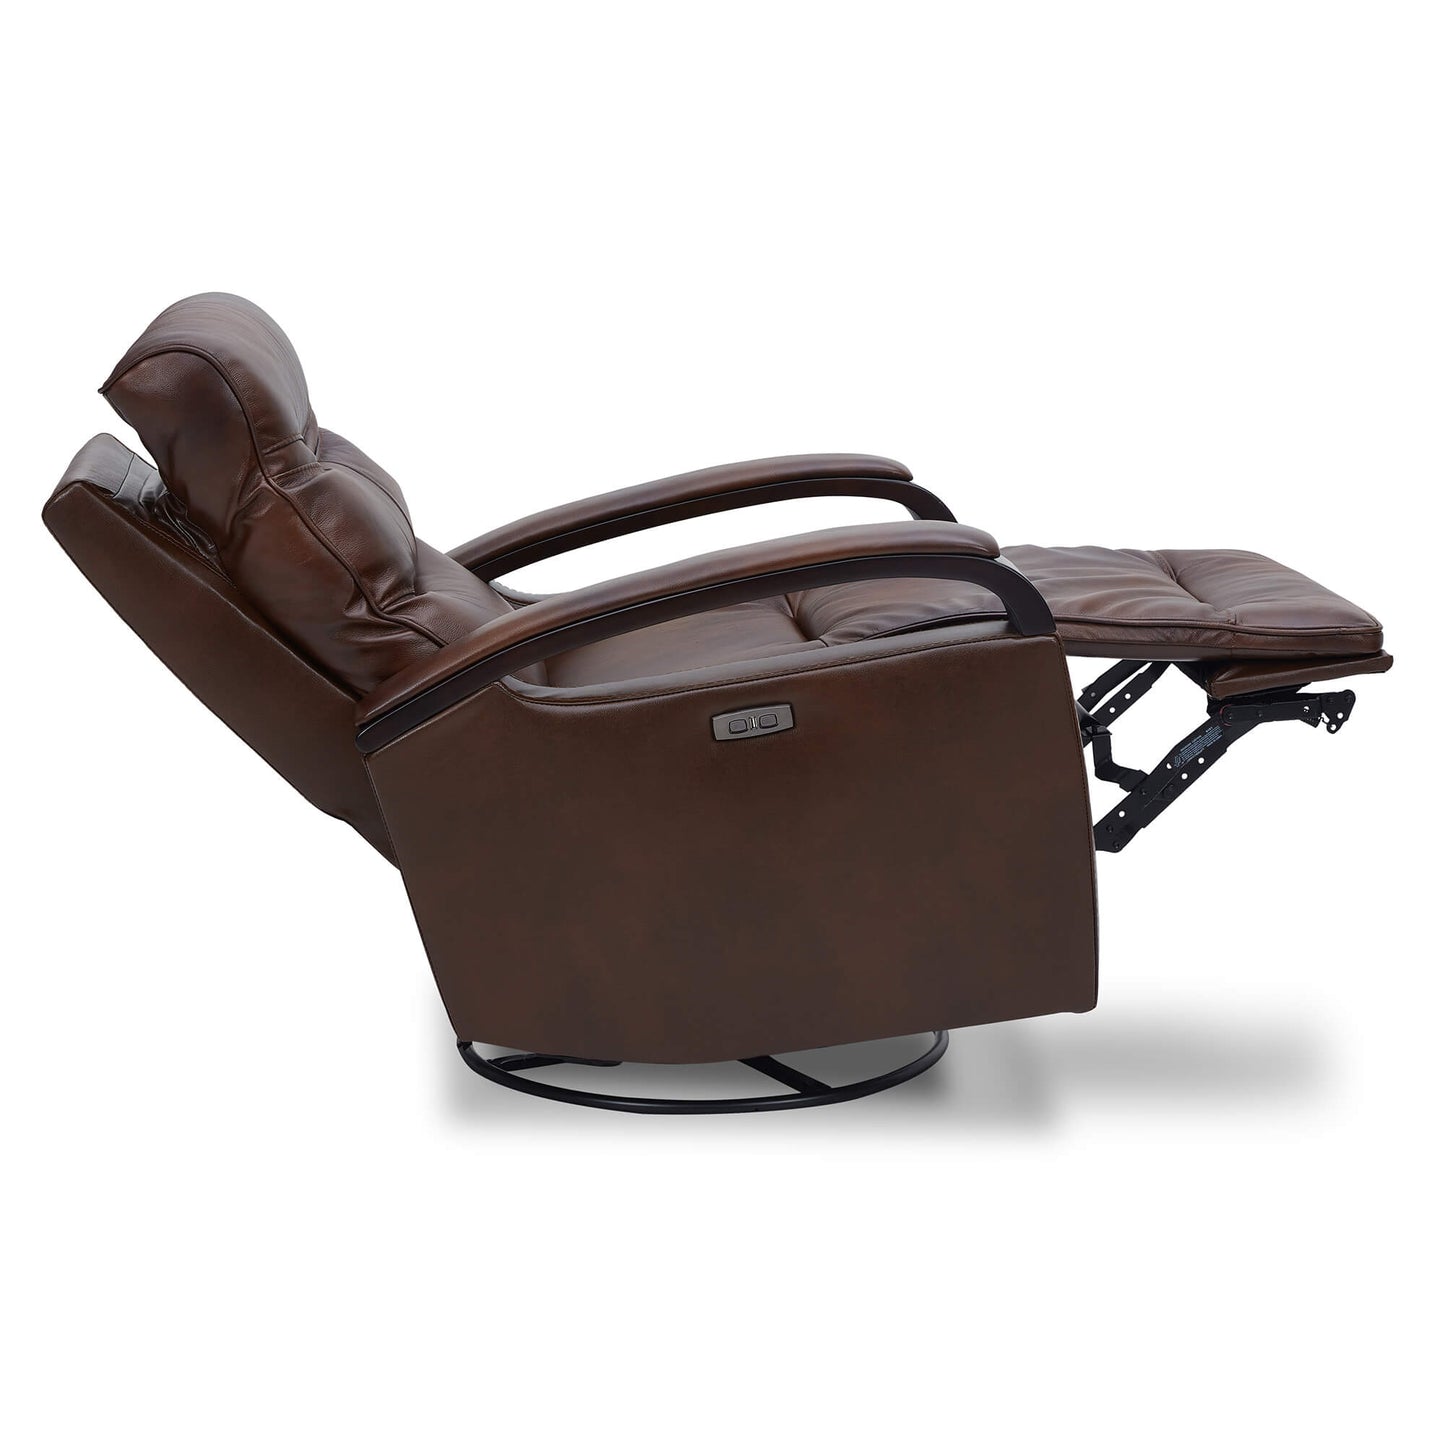 CHITA LIVING-Gentry Leather Power Swivel Glider Recliner with USB Charge-Recliners-Genuine Leather-Cognac-